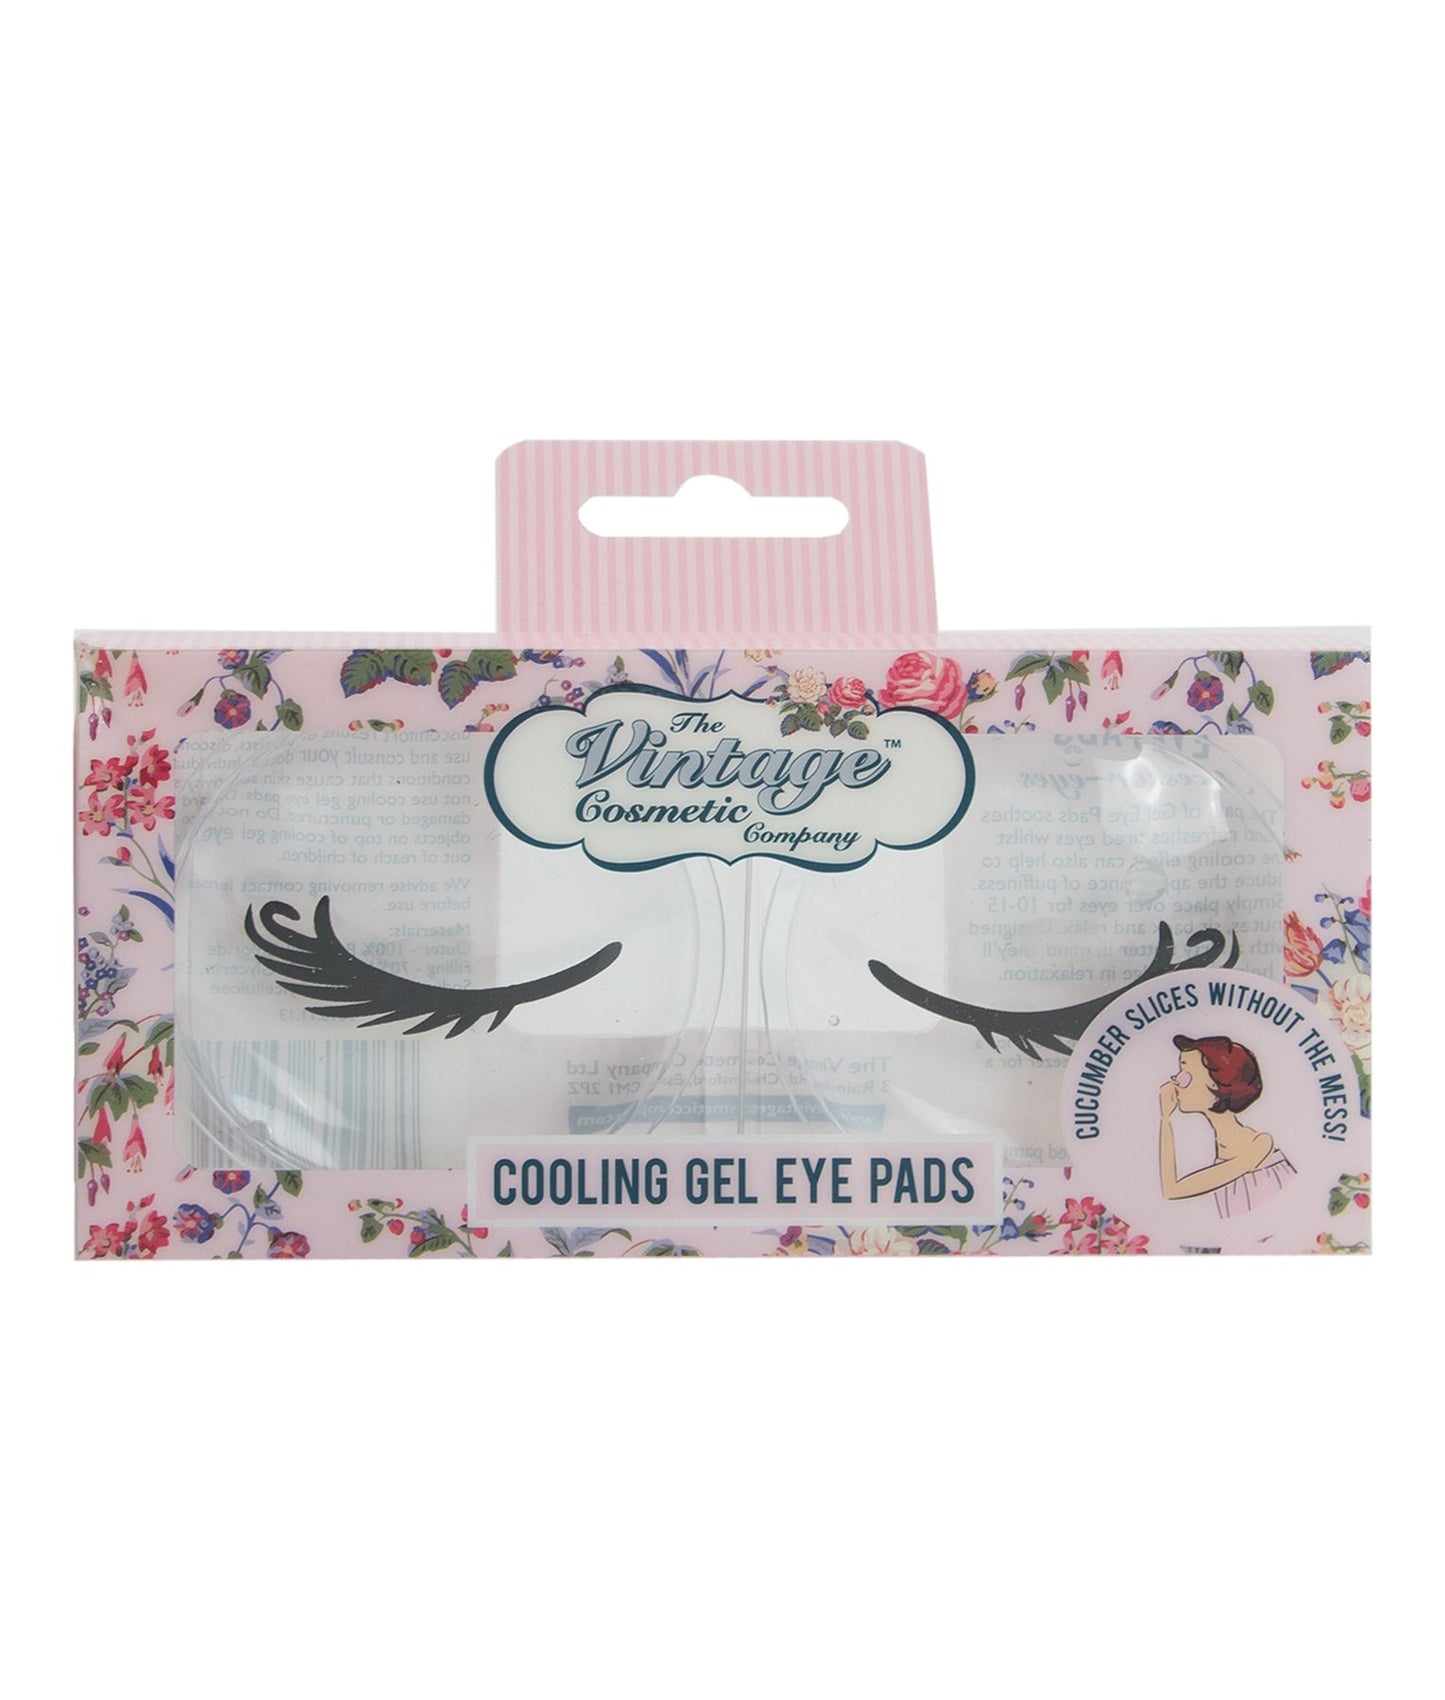 The Vintage Cosmetic Company - Cooling Gel Eye Pads - ADDROS.COM